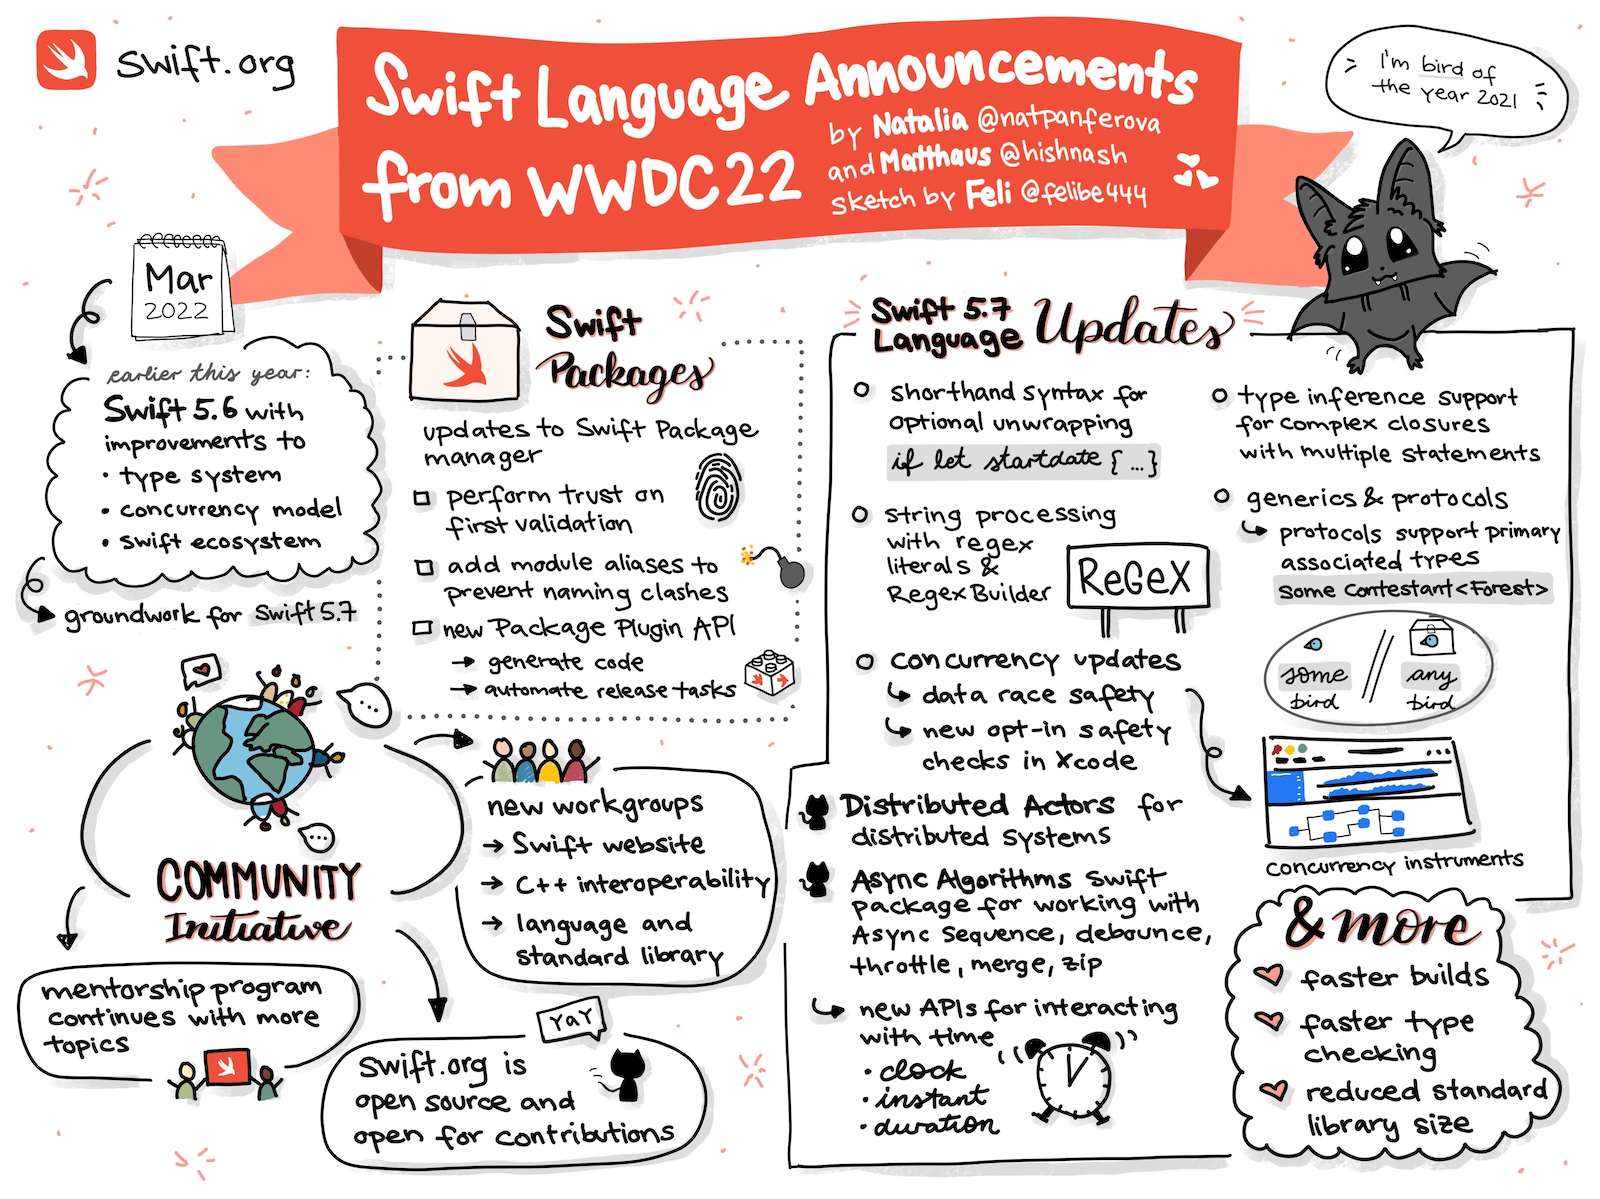 Sketchnote summary for Swift language announcements from WWDC22 blog post